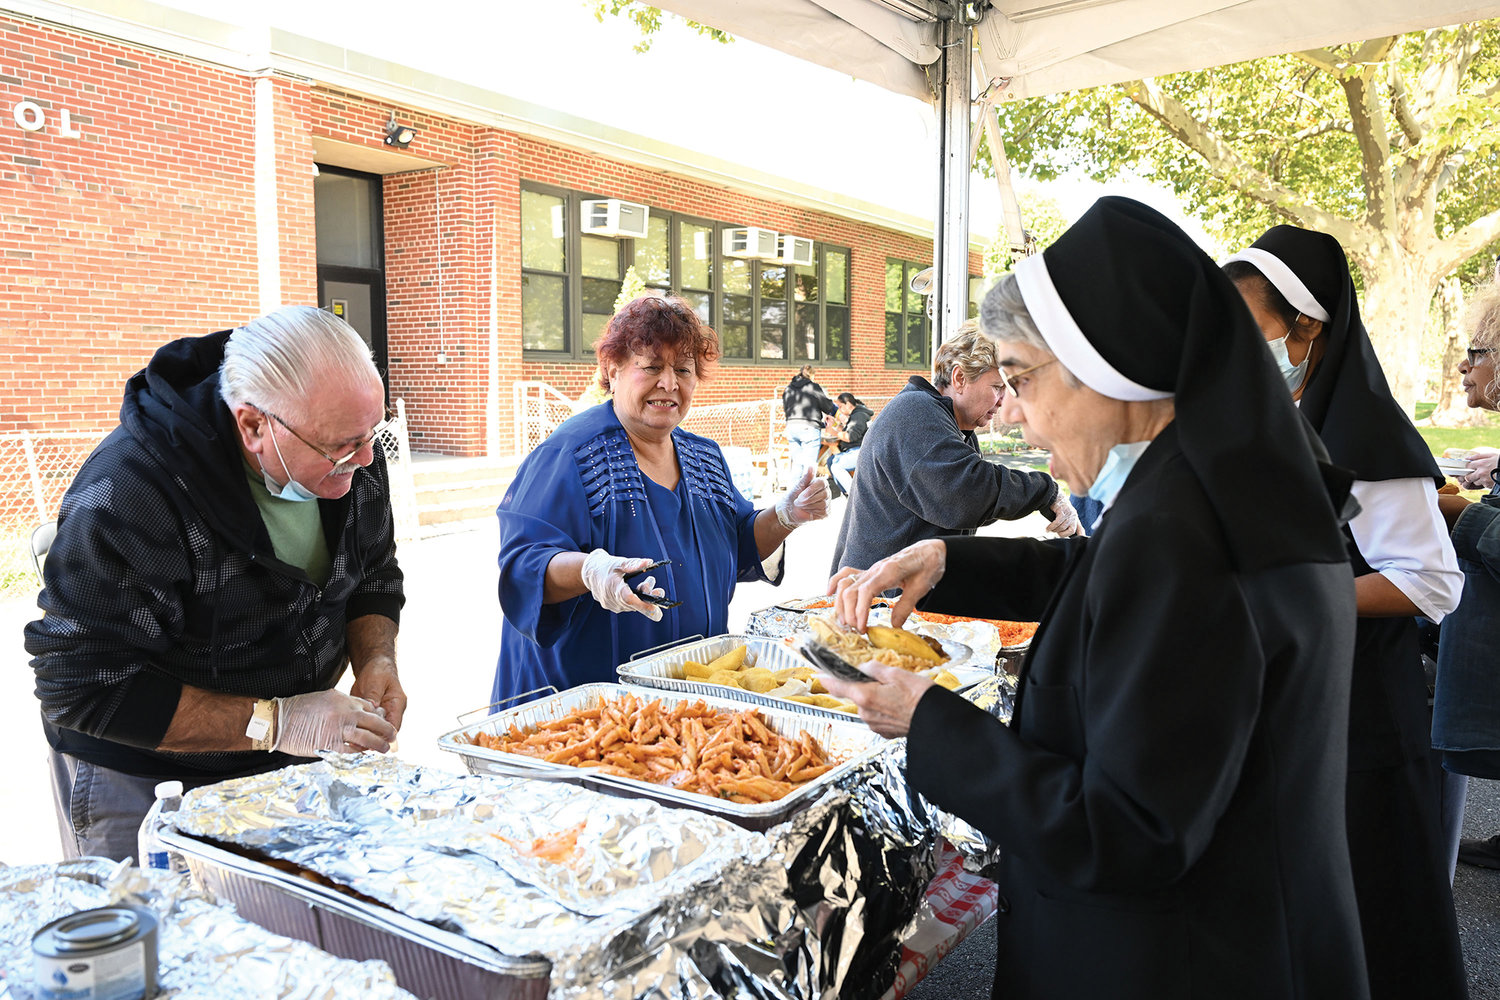 Sisters of St. John the Baptist enjoy the food at the picnic after Mass.